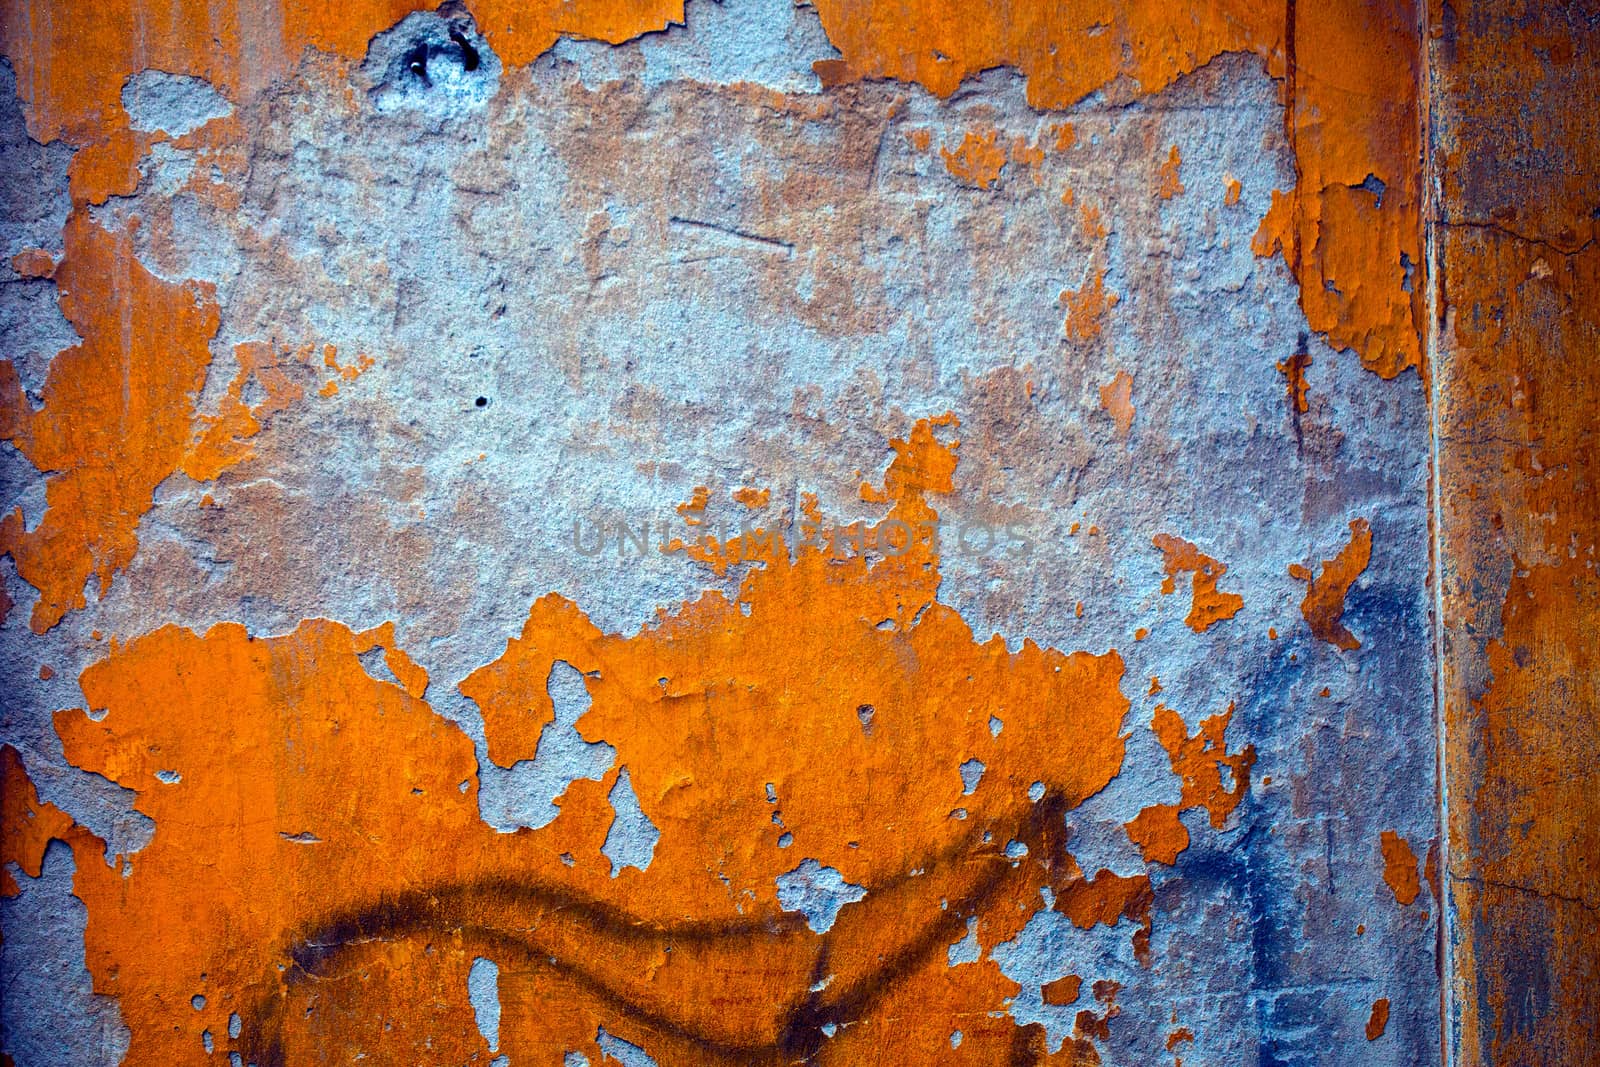 Dirty Grunge Wall Textural background